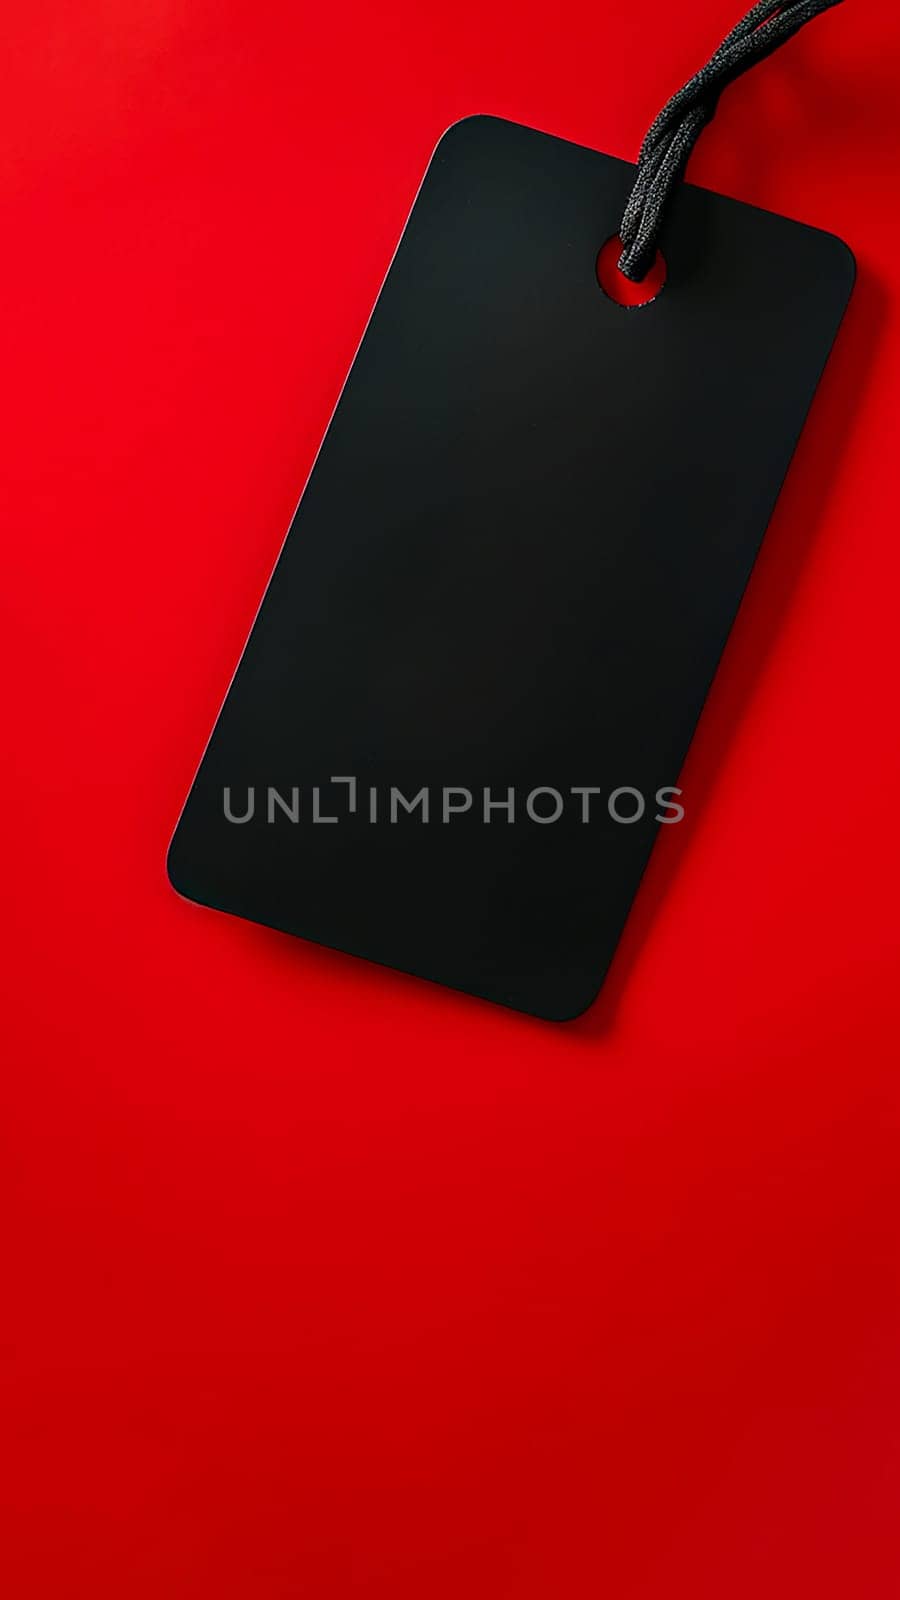 Black empty price tag on red background. Black Friday concept, template copyspace.